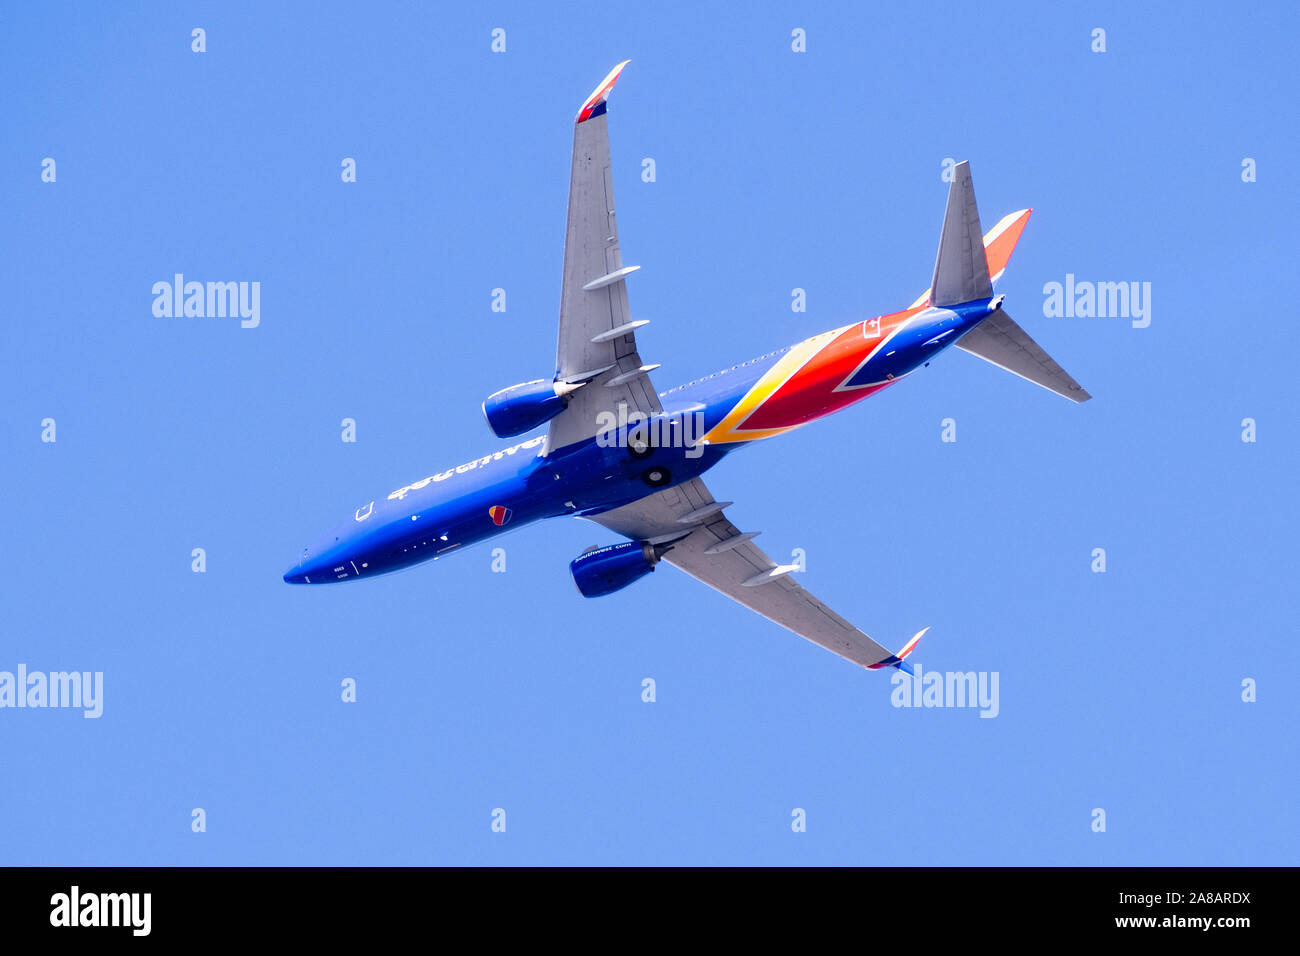 Oct 20, 2019 San Jose / CA / USA - Southwest Airlines aircraft in flight; the Southwest Airlines heart Logo visible on the airplanes' underbelly; blue Stock Photo